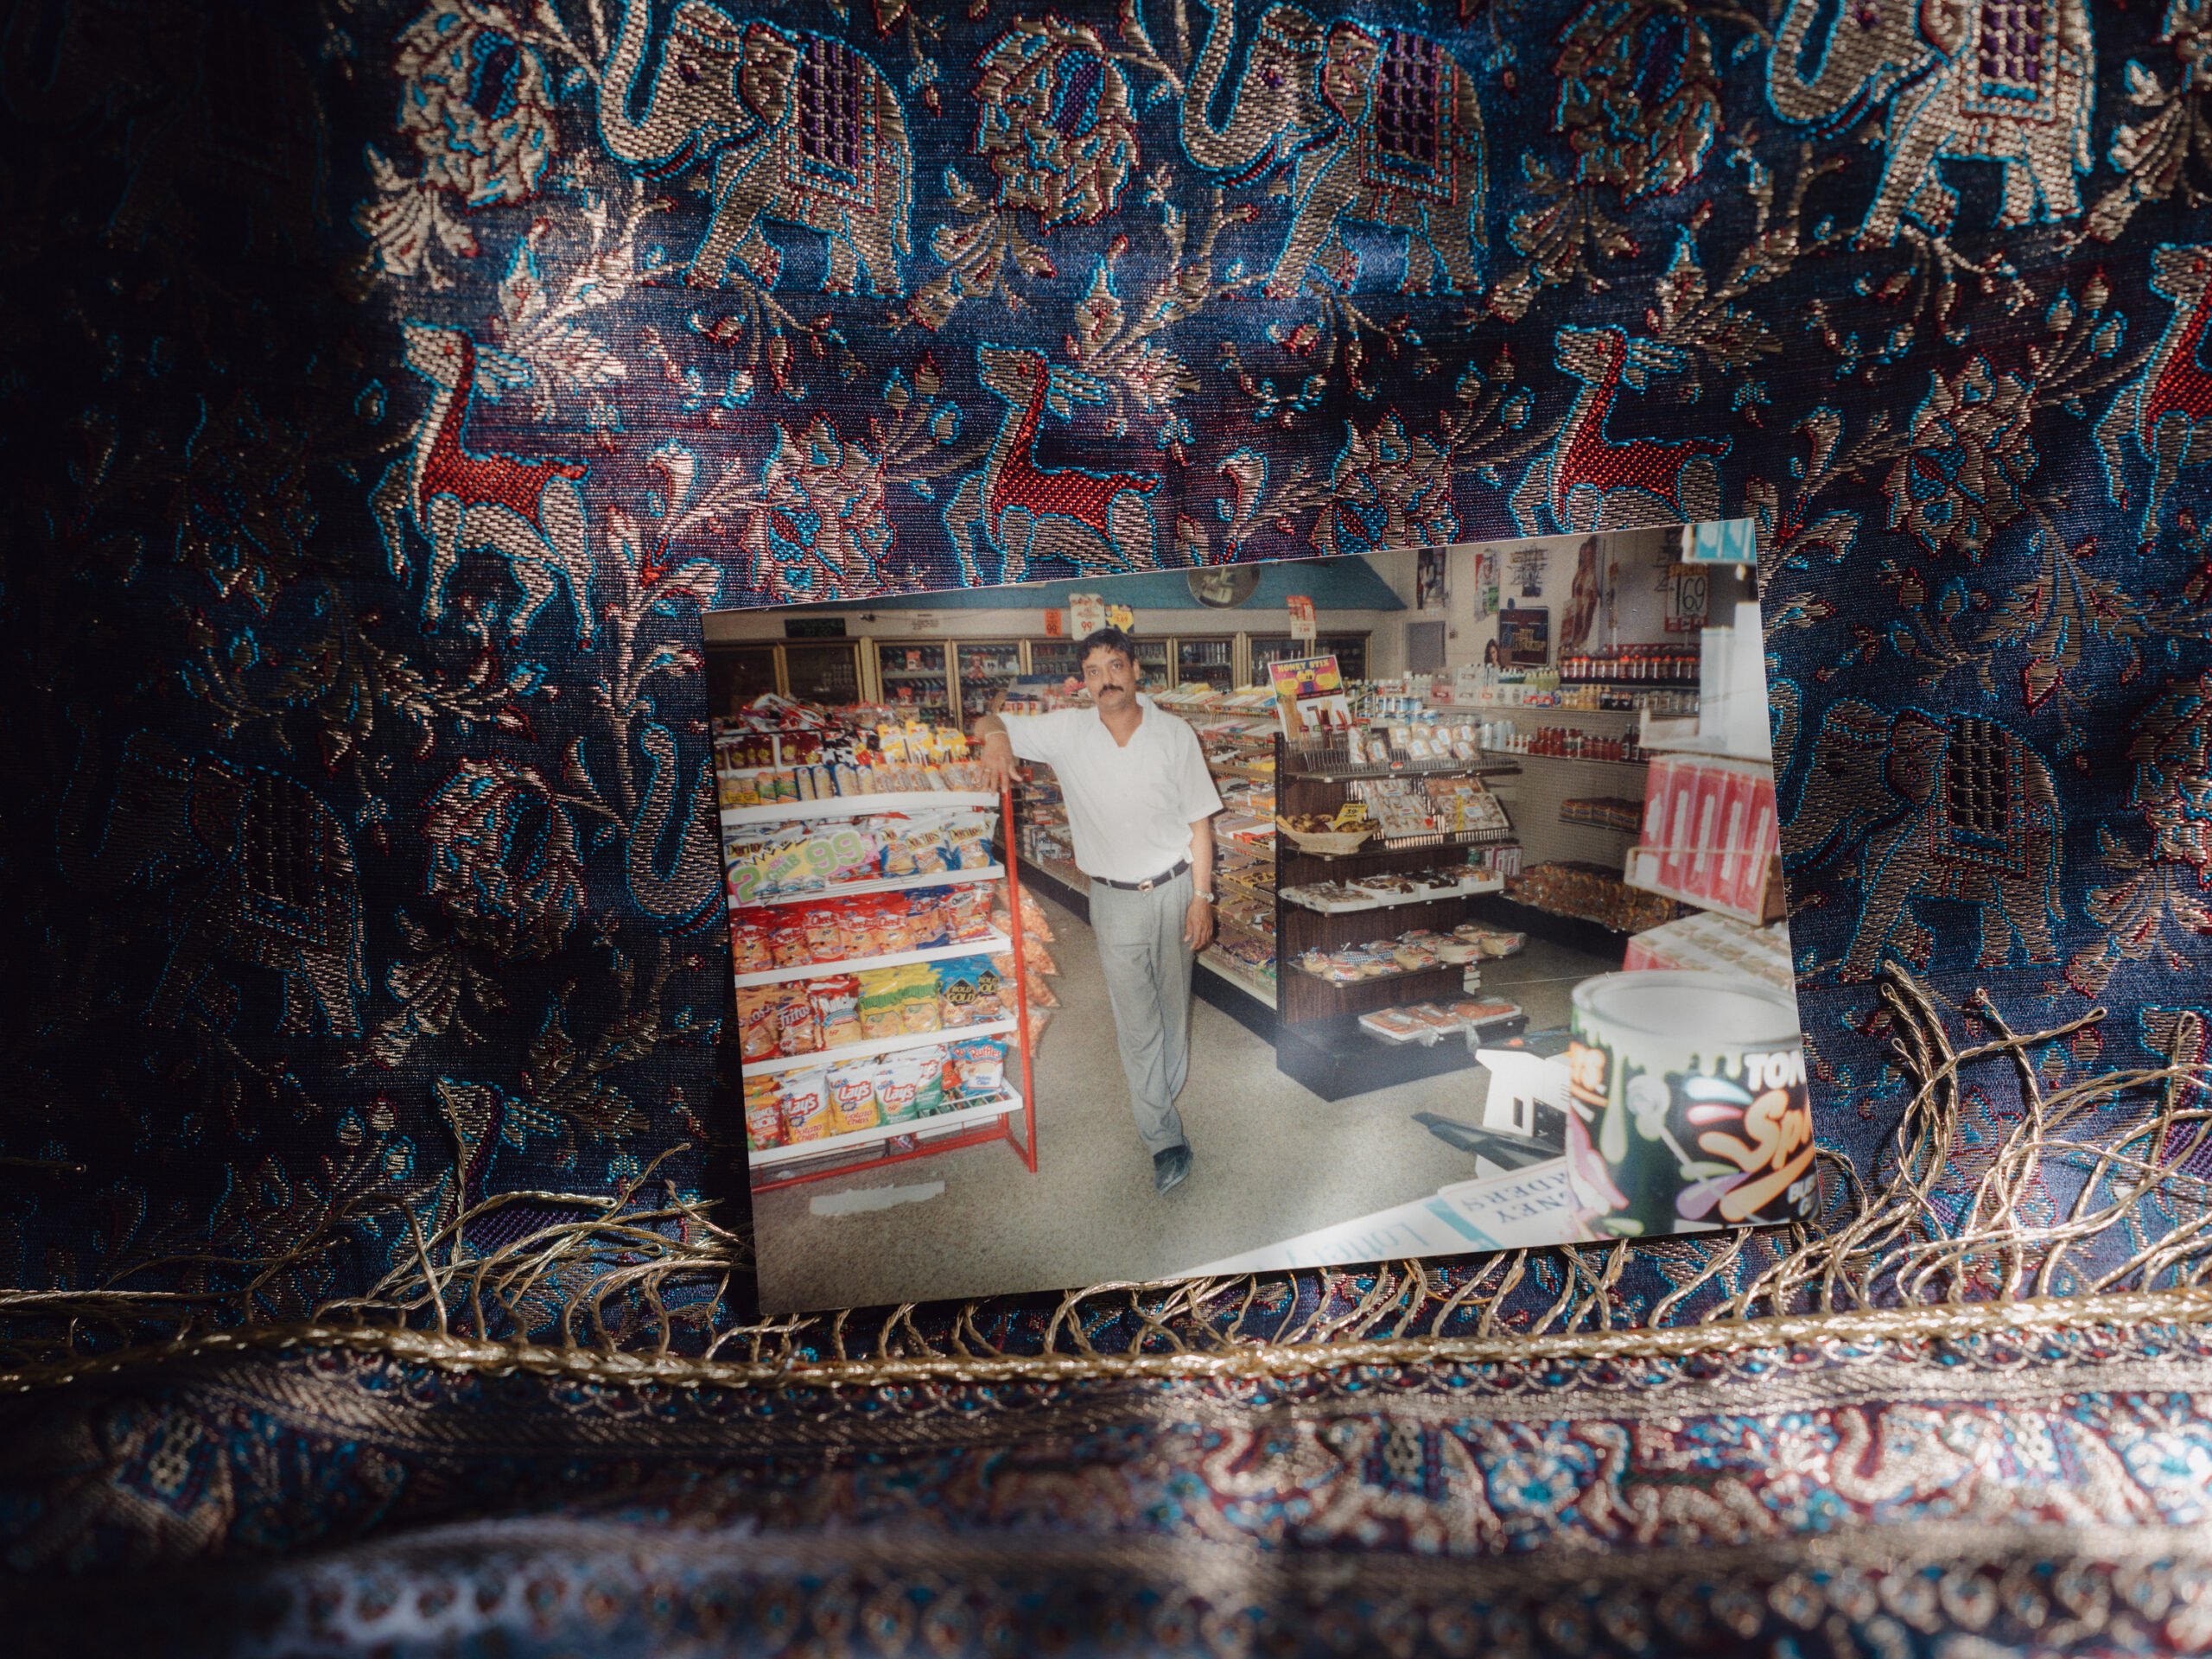 A photo of Hasmukh Patel in his convenience store is photographed on a backdrop of an old-fashioned Indian sari fabric printed with elephants and camels.